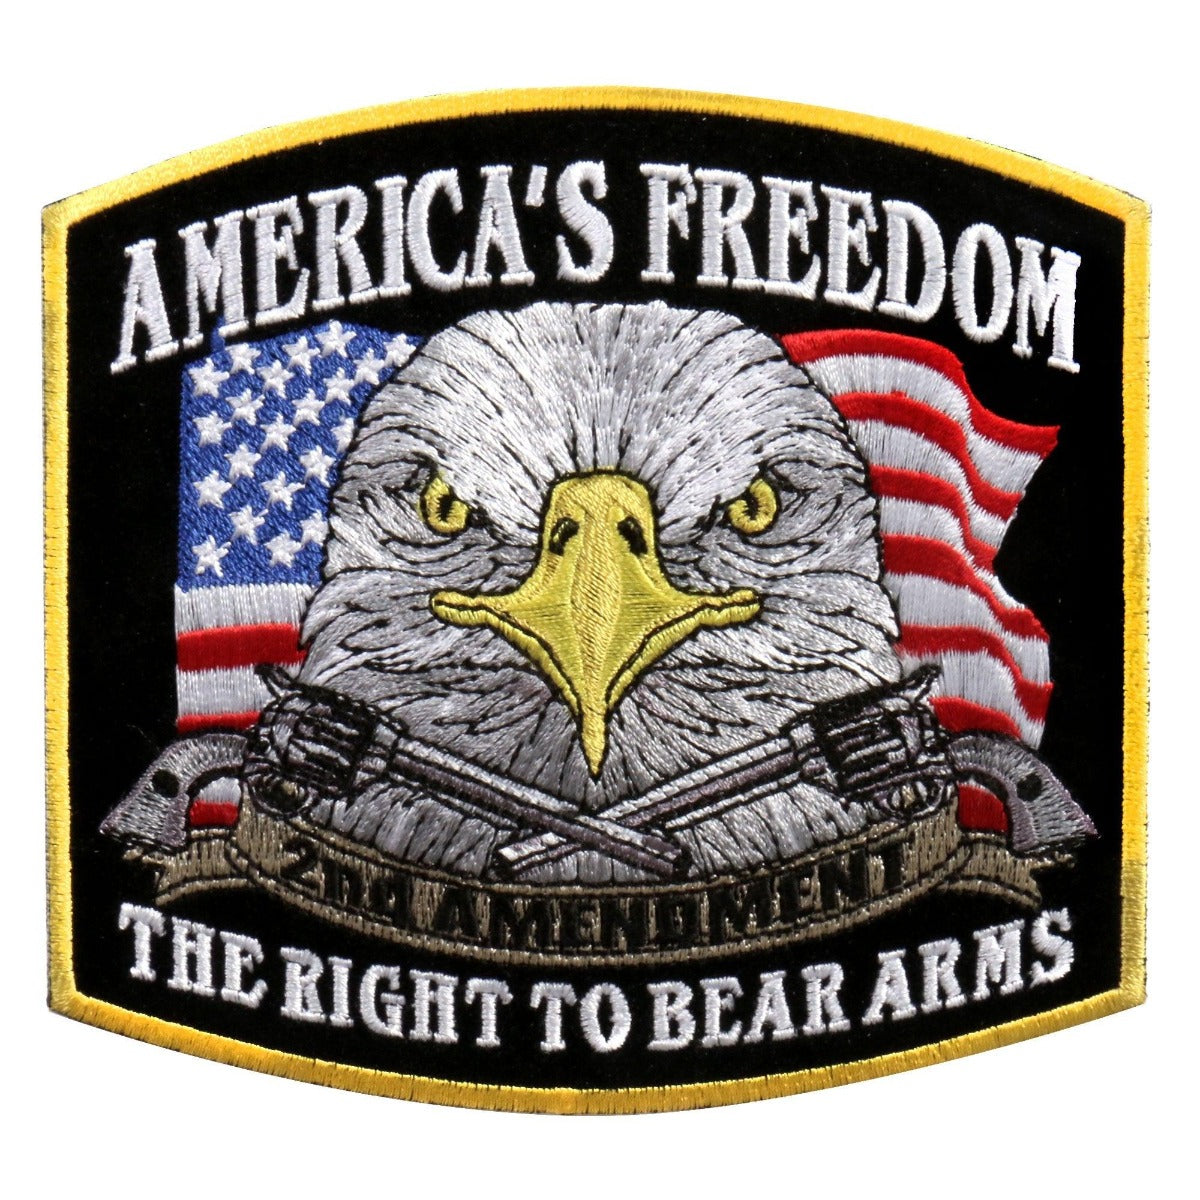 Hot Leathers 5" X 4" America'S Freedom Second Ammendment Patch - American Legend Rider